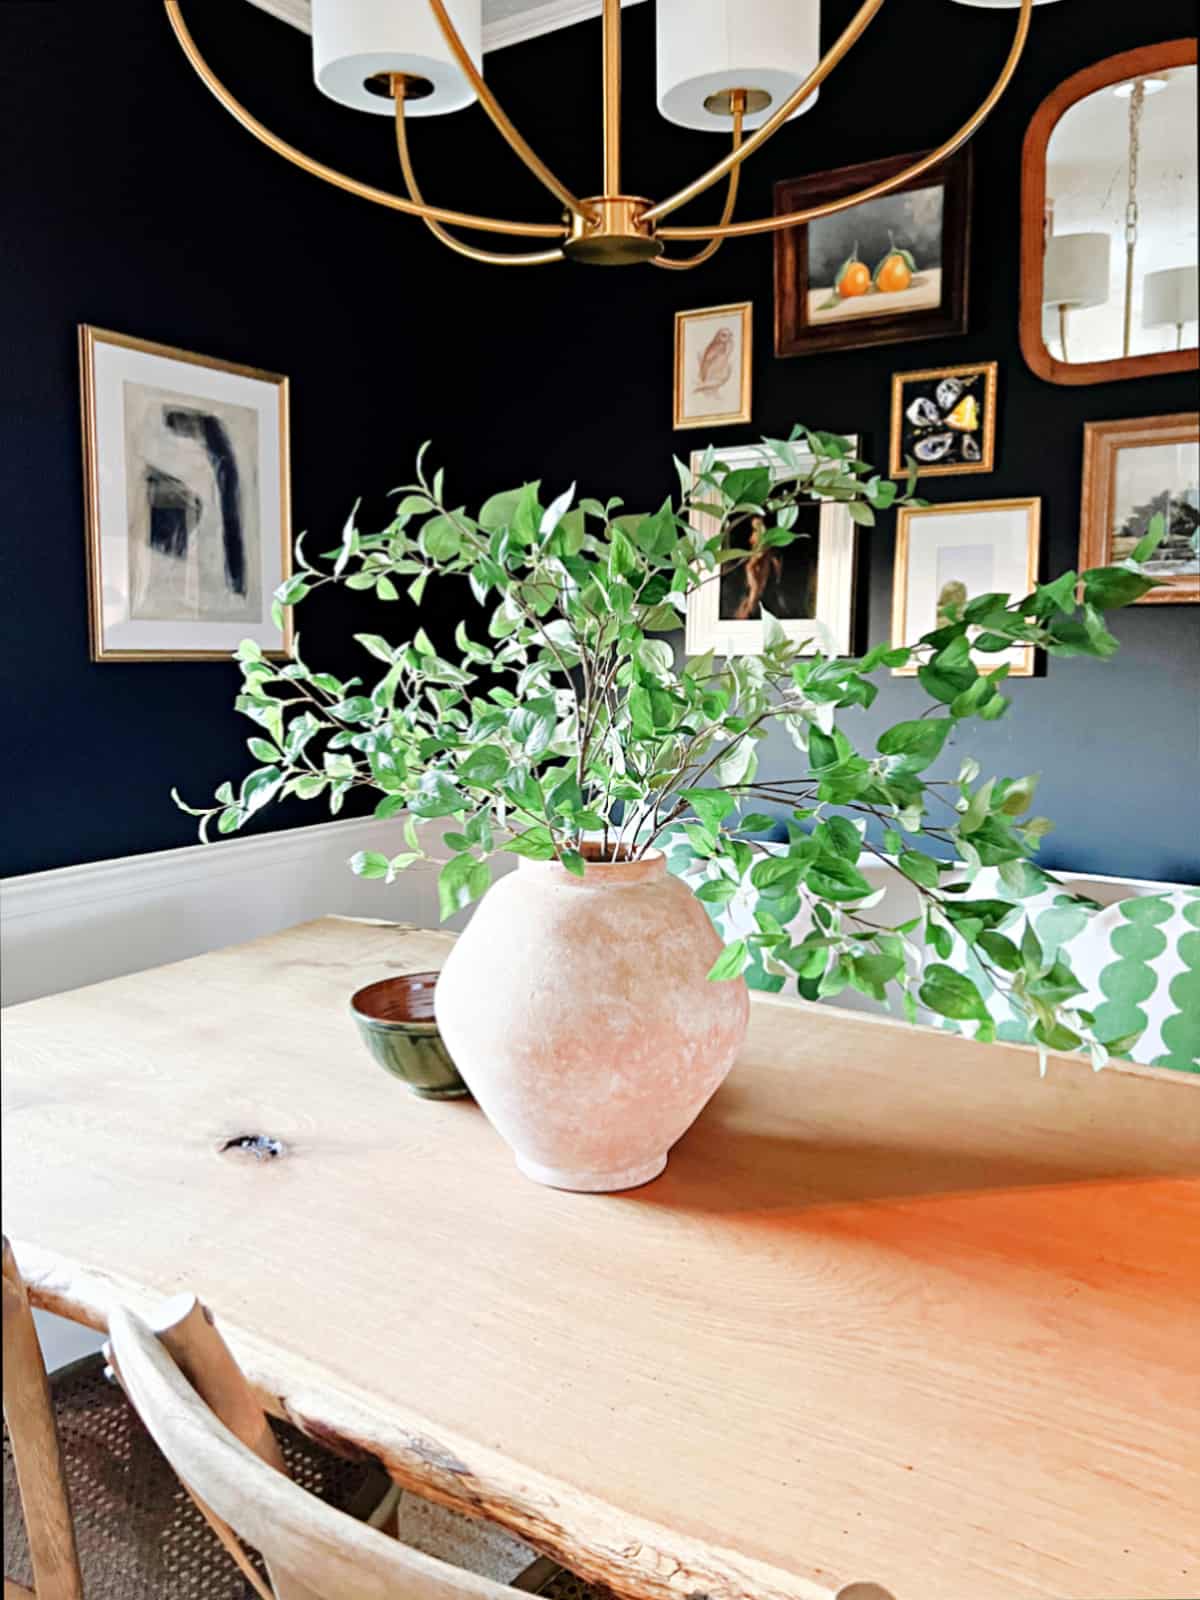 terracotta vase on table in small breakfast nook wth black painted walls